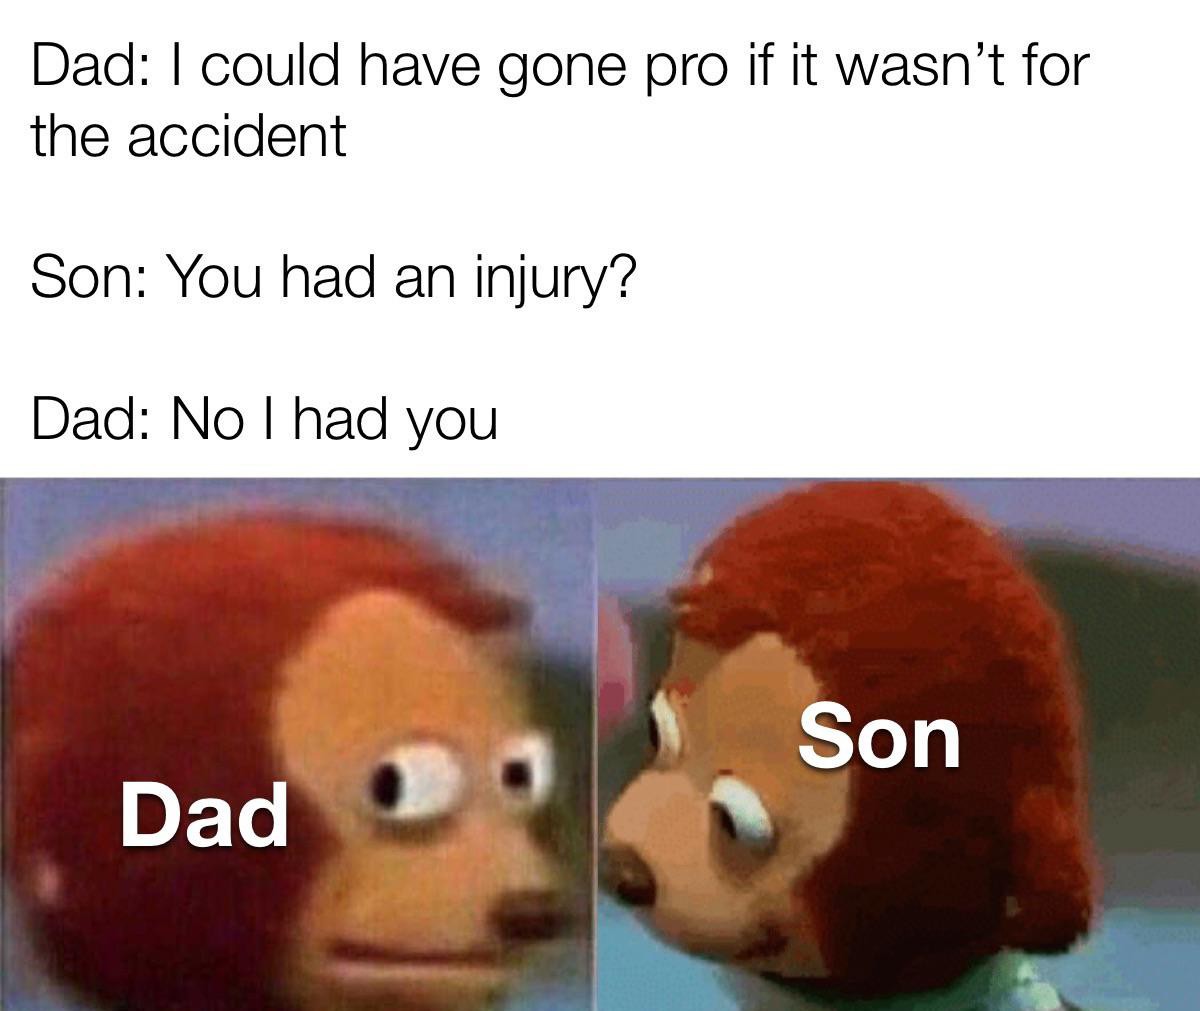 canada oil meme - Dad I could have gone pro if it wasn't for the accident Son You had an injury? Dad No I had you Son Dad